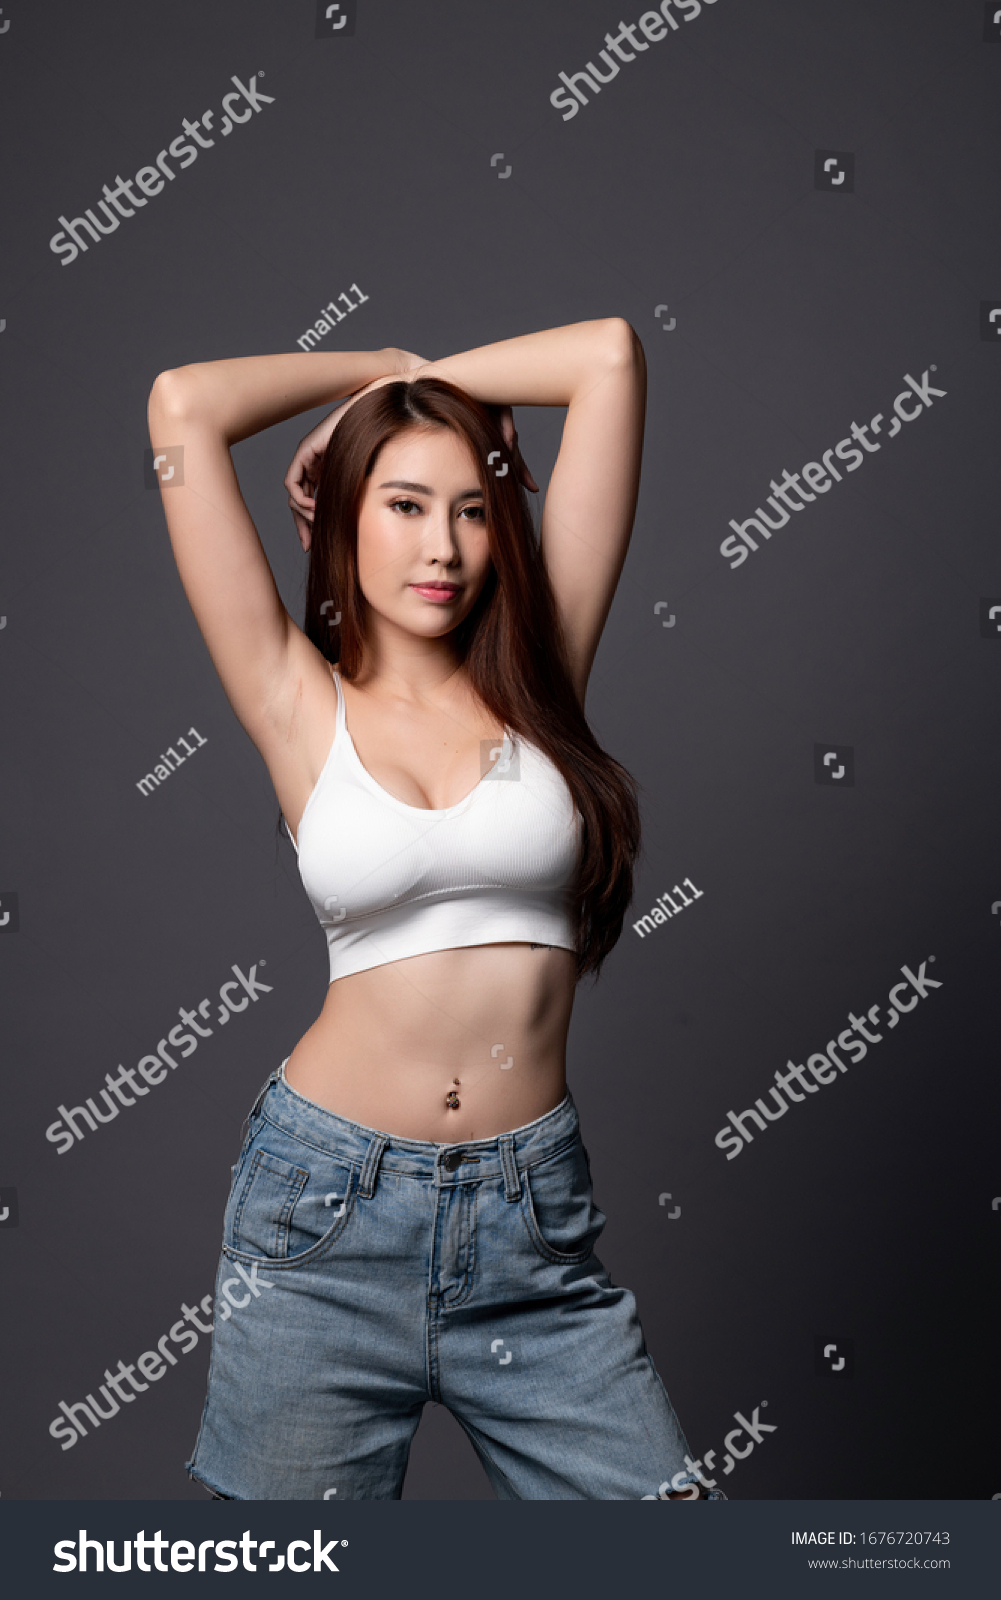 Pictures Of Hot Asian Girls